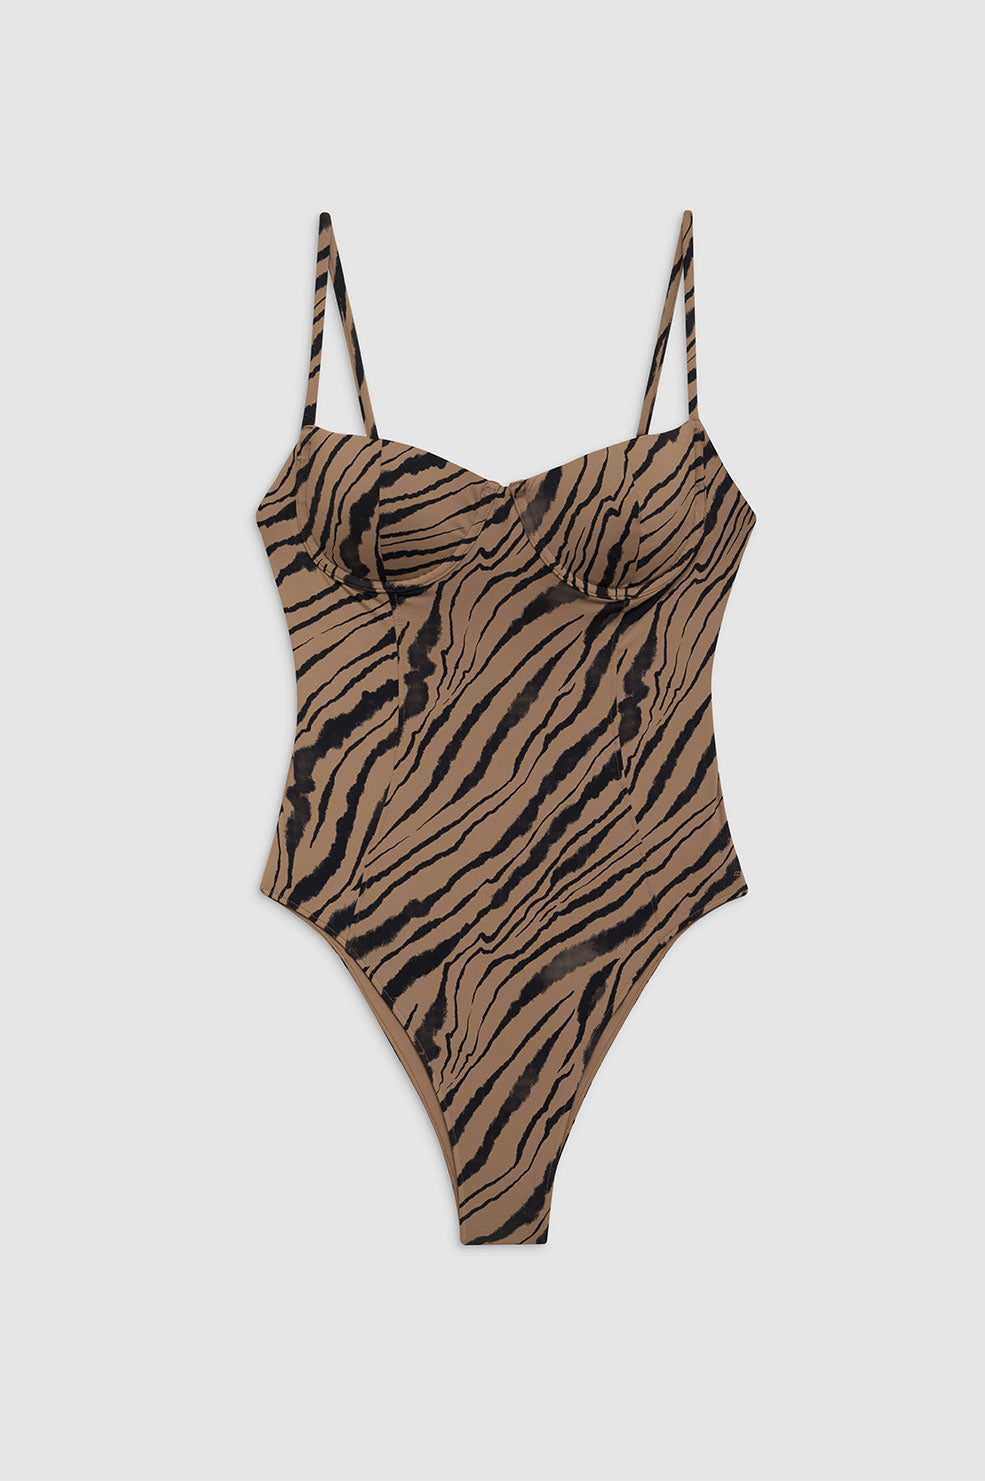 ANINE BING Kyler One Piece - Tiger Shell Print - Front View